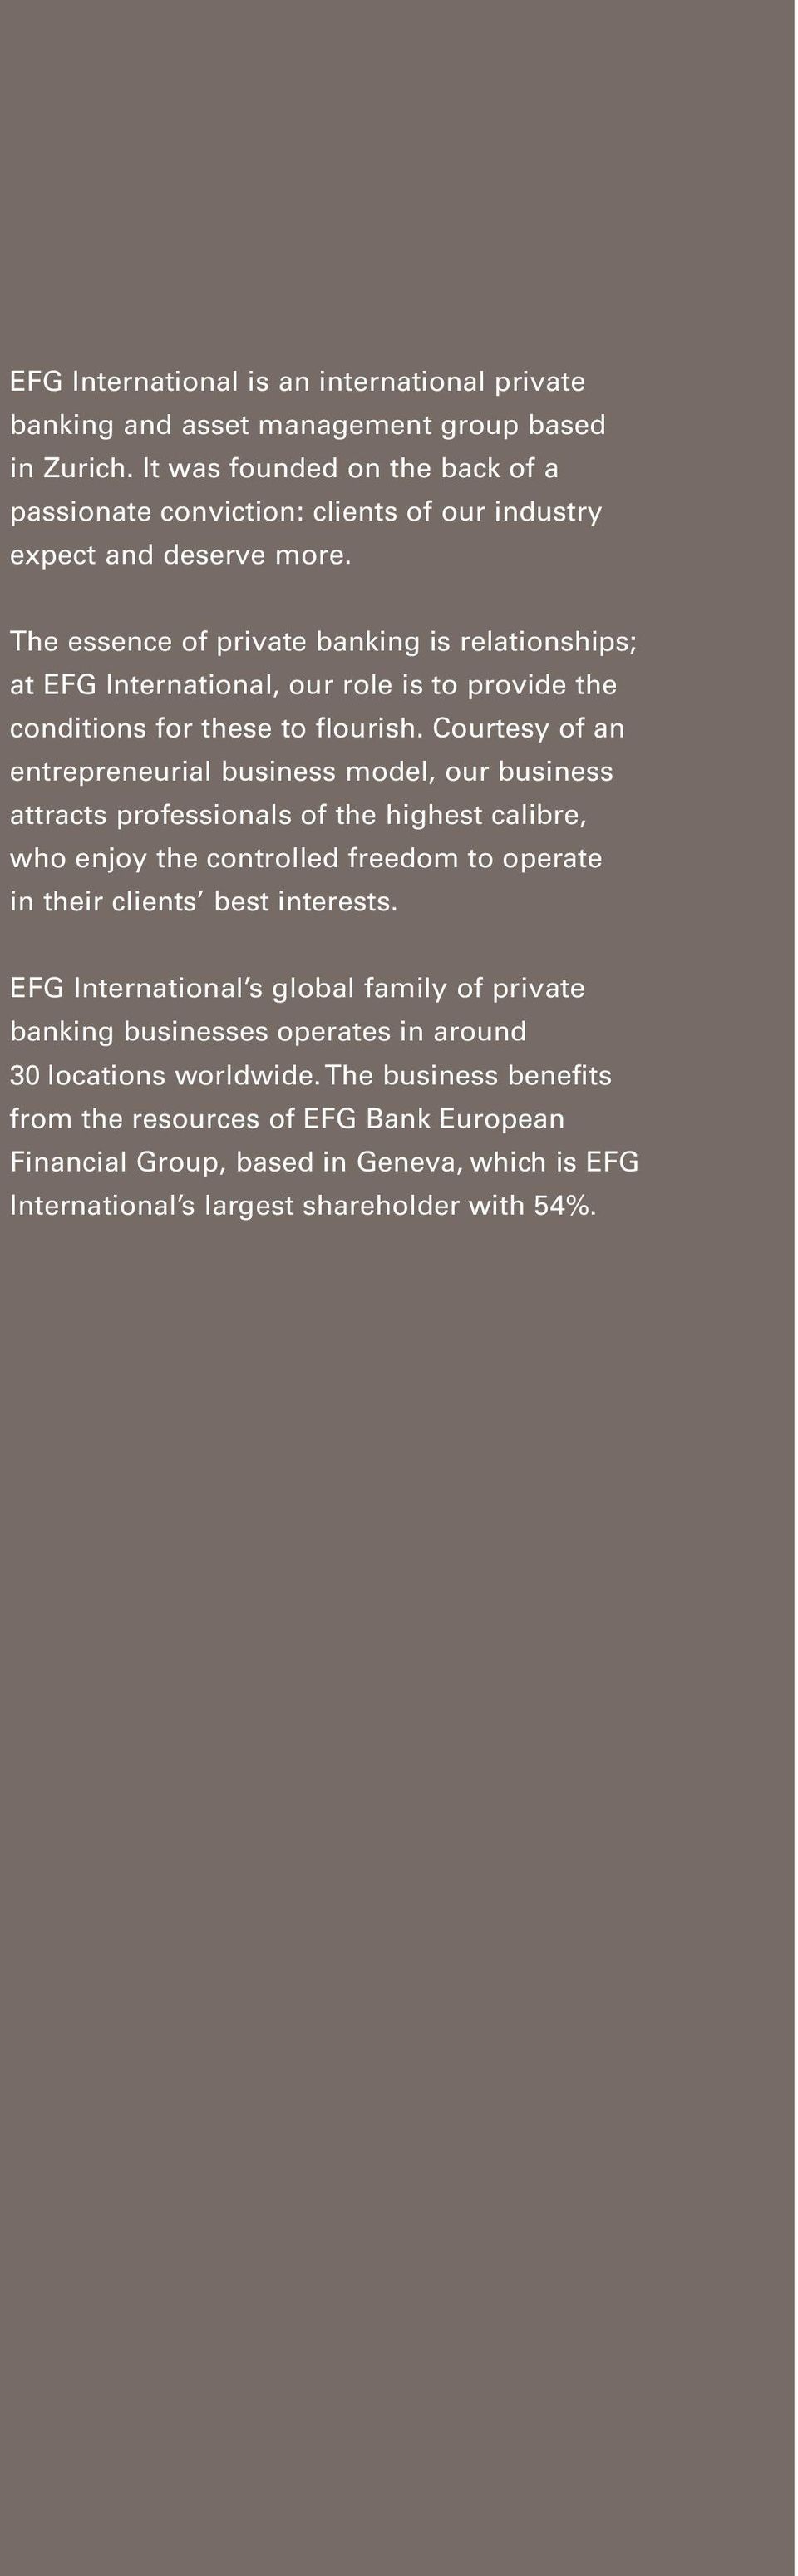 The essence of private banking is relationships; at EFG International, our role is to provide the con ditions for these to flourish.